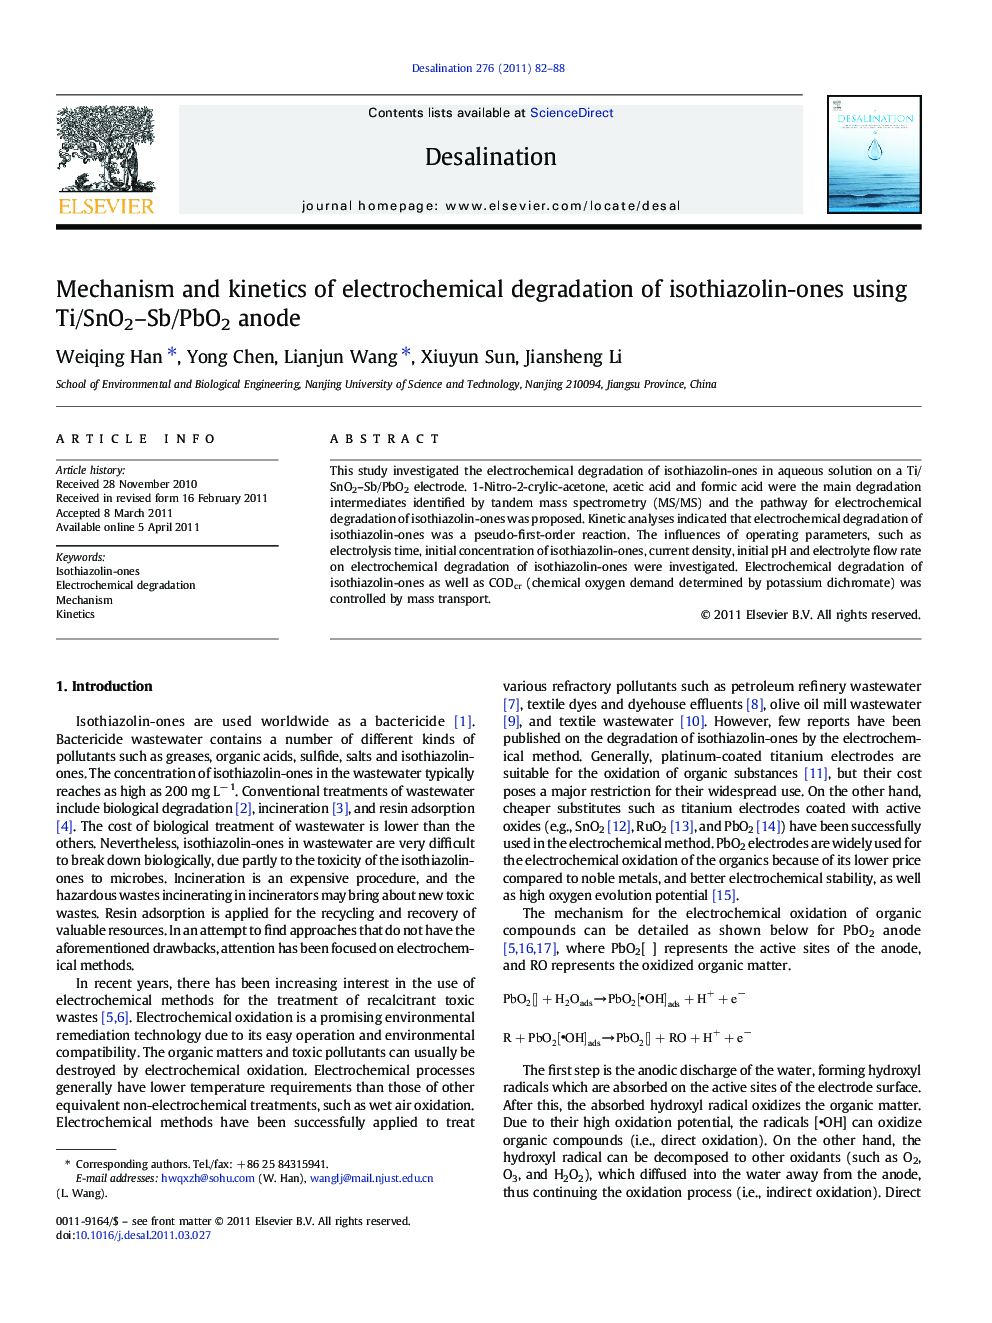 Mechanism and kinetics of electrochemical degradation of isothiazolin-ones using Ti/SnO2–Sb/PbO2 anode